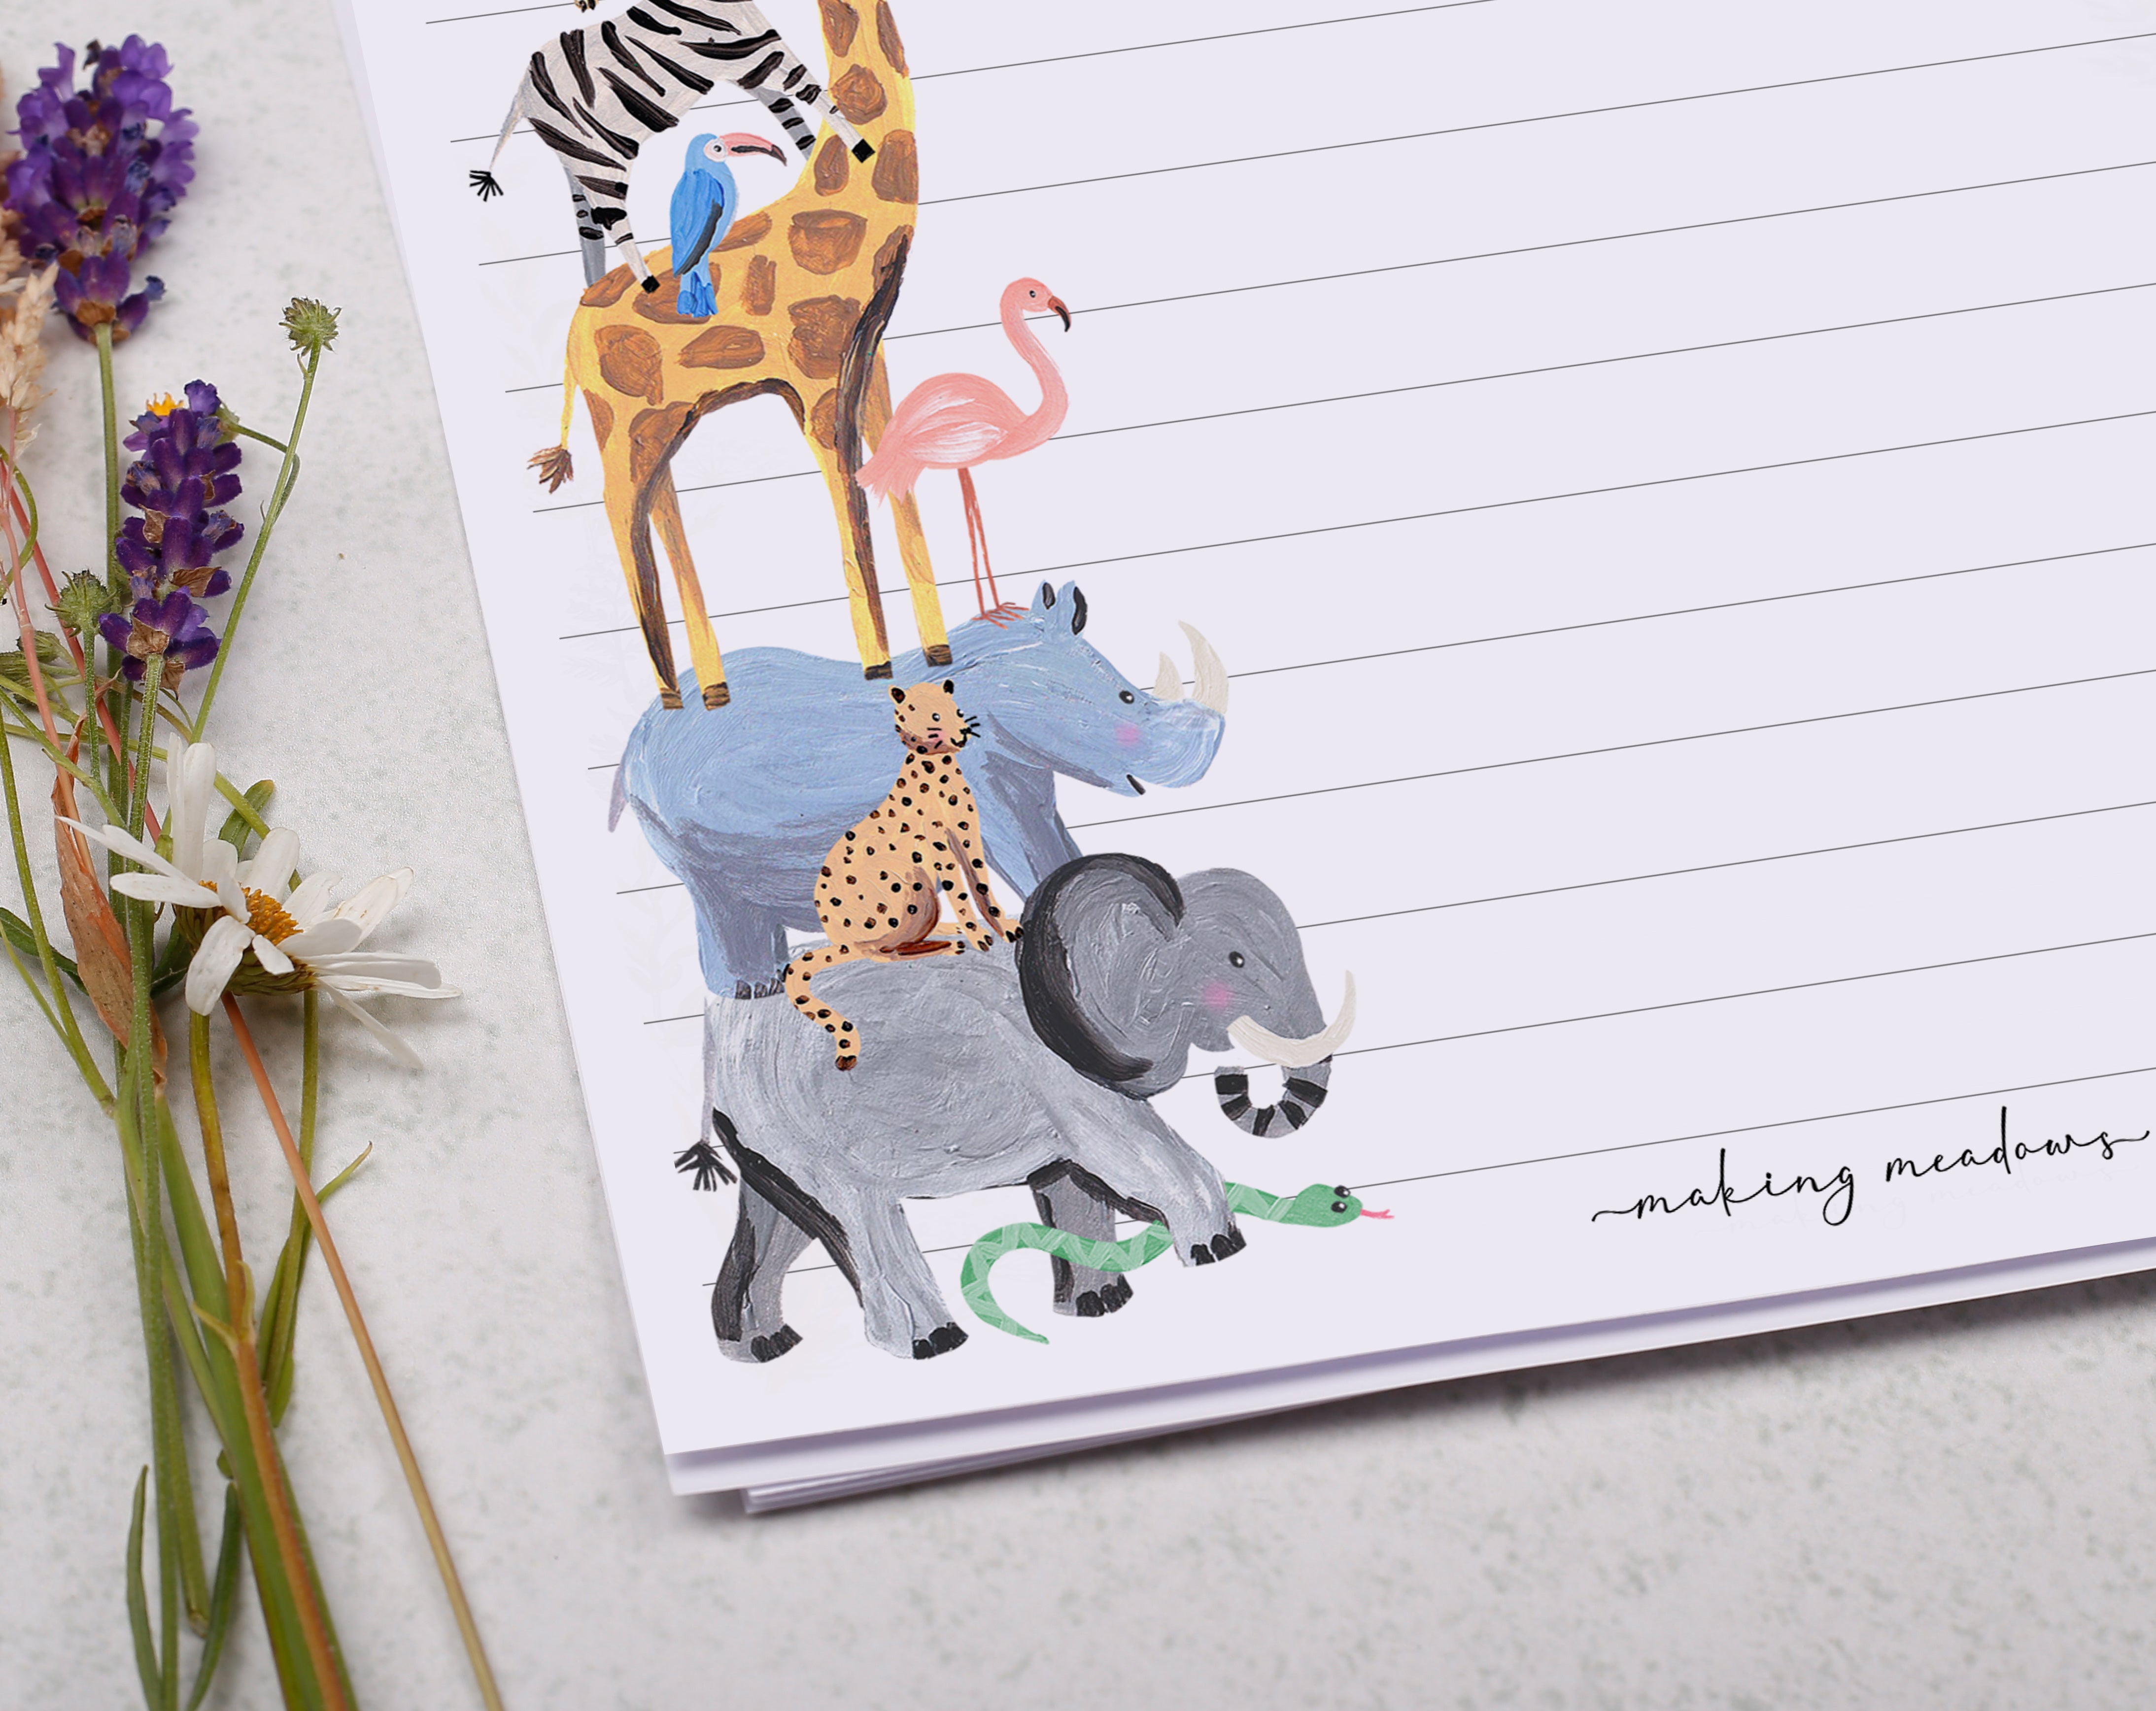 Premium personalised A5 letter writing paper set for children with cute zoo animals in the jungle design.